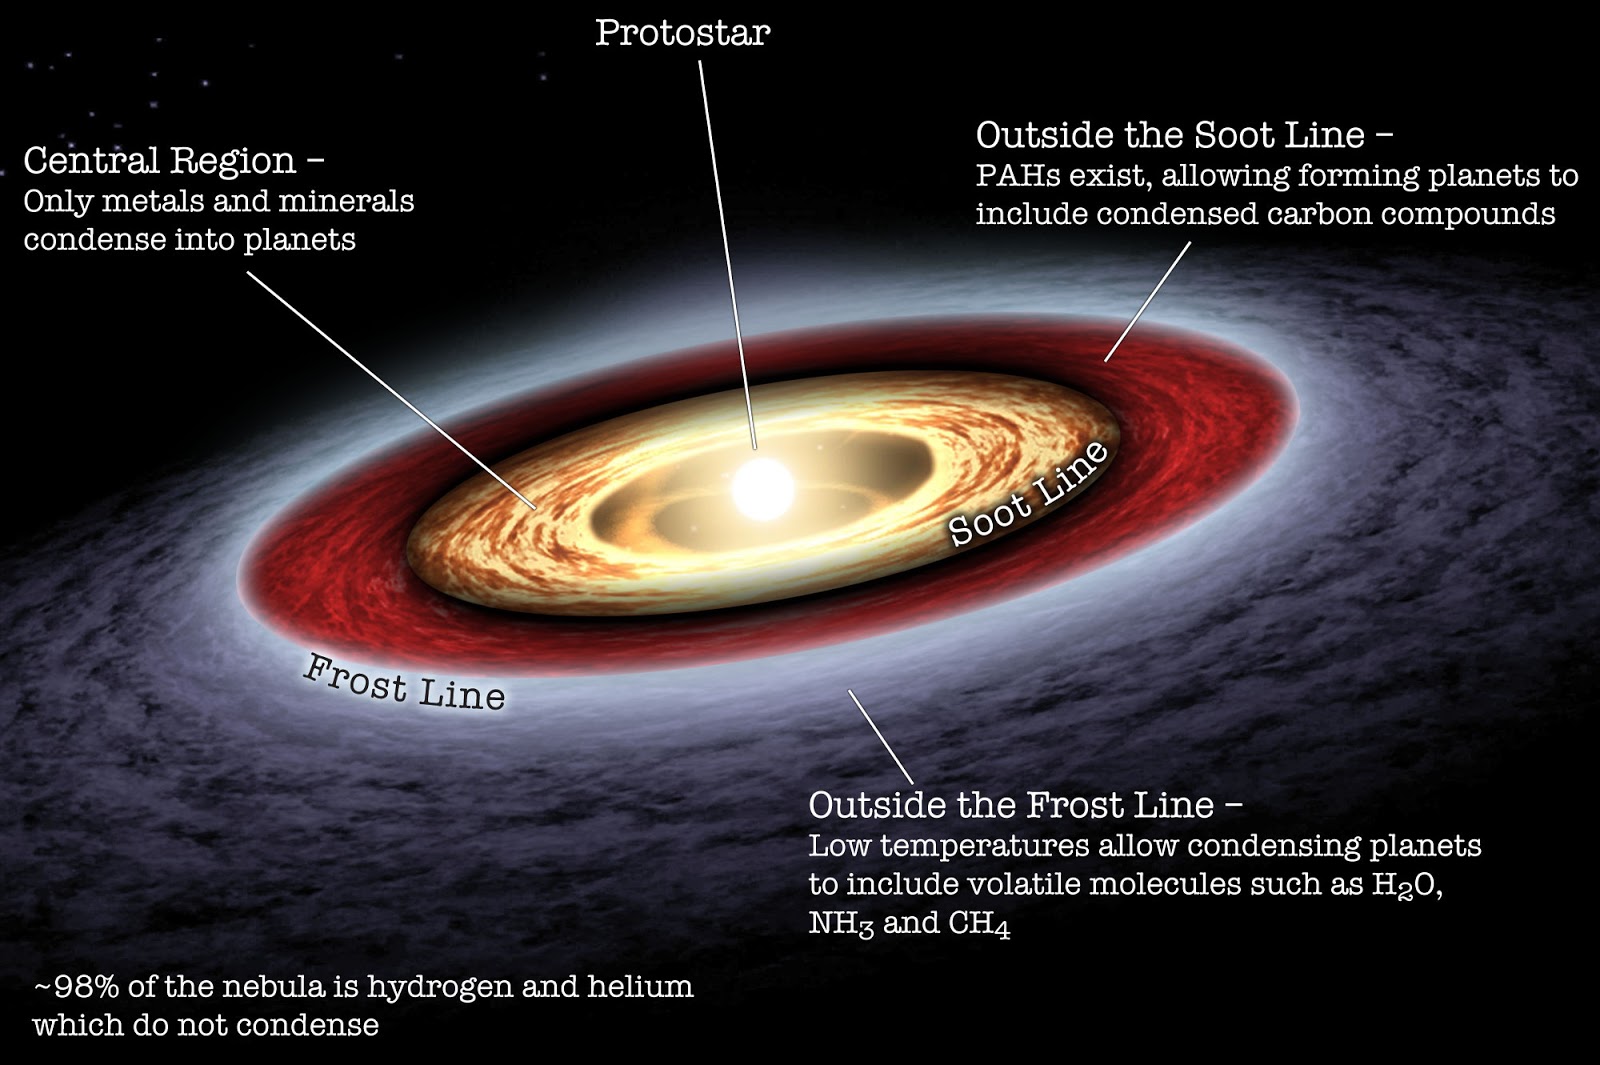 protoplanet hypothesis means